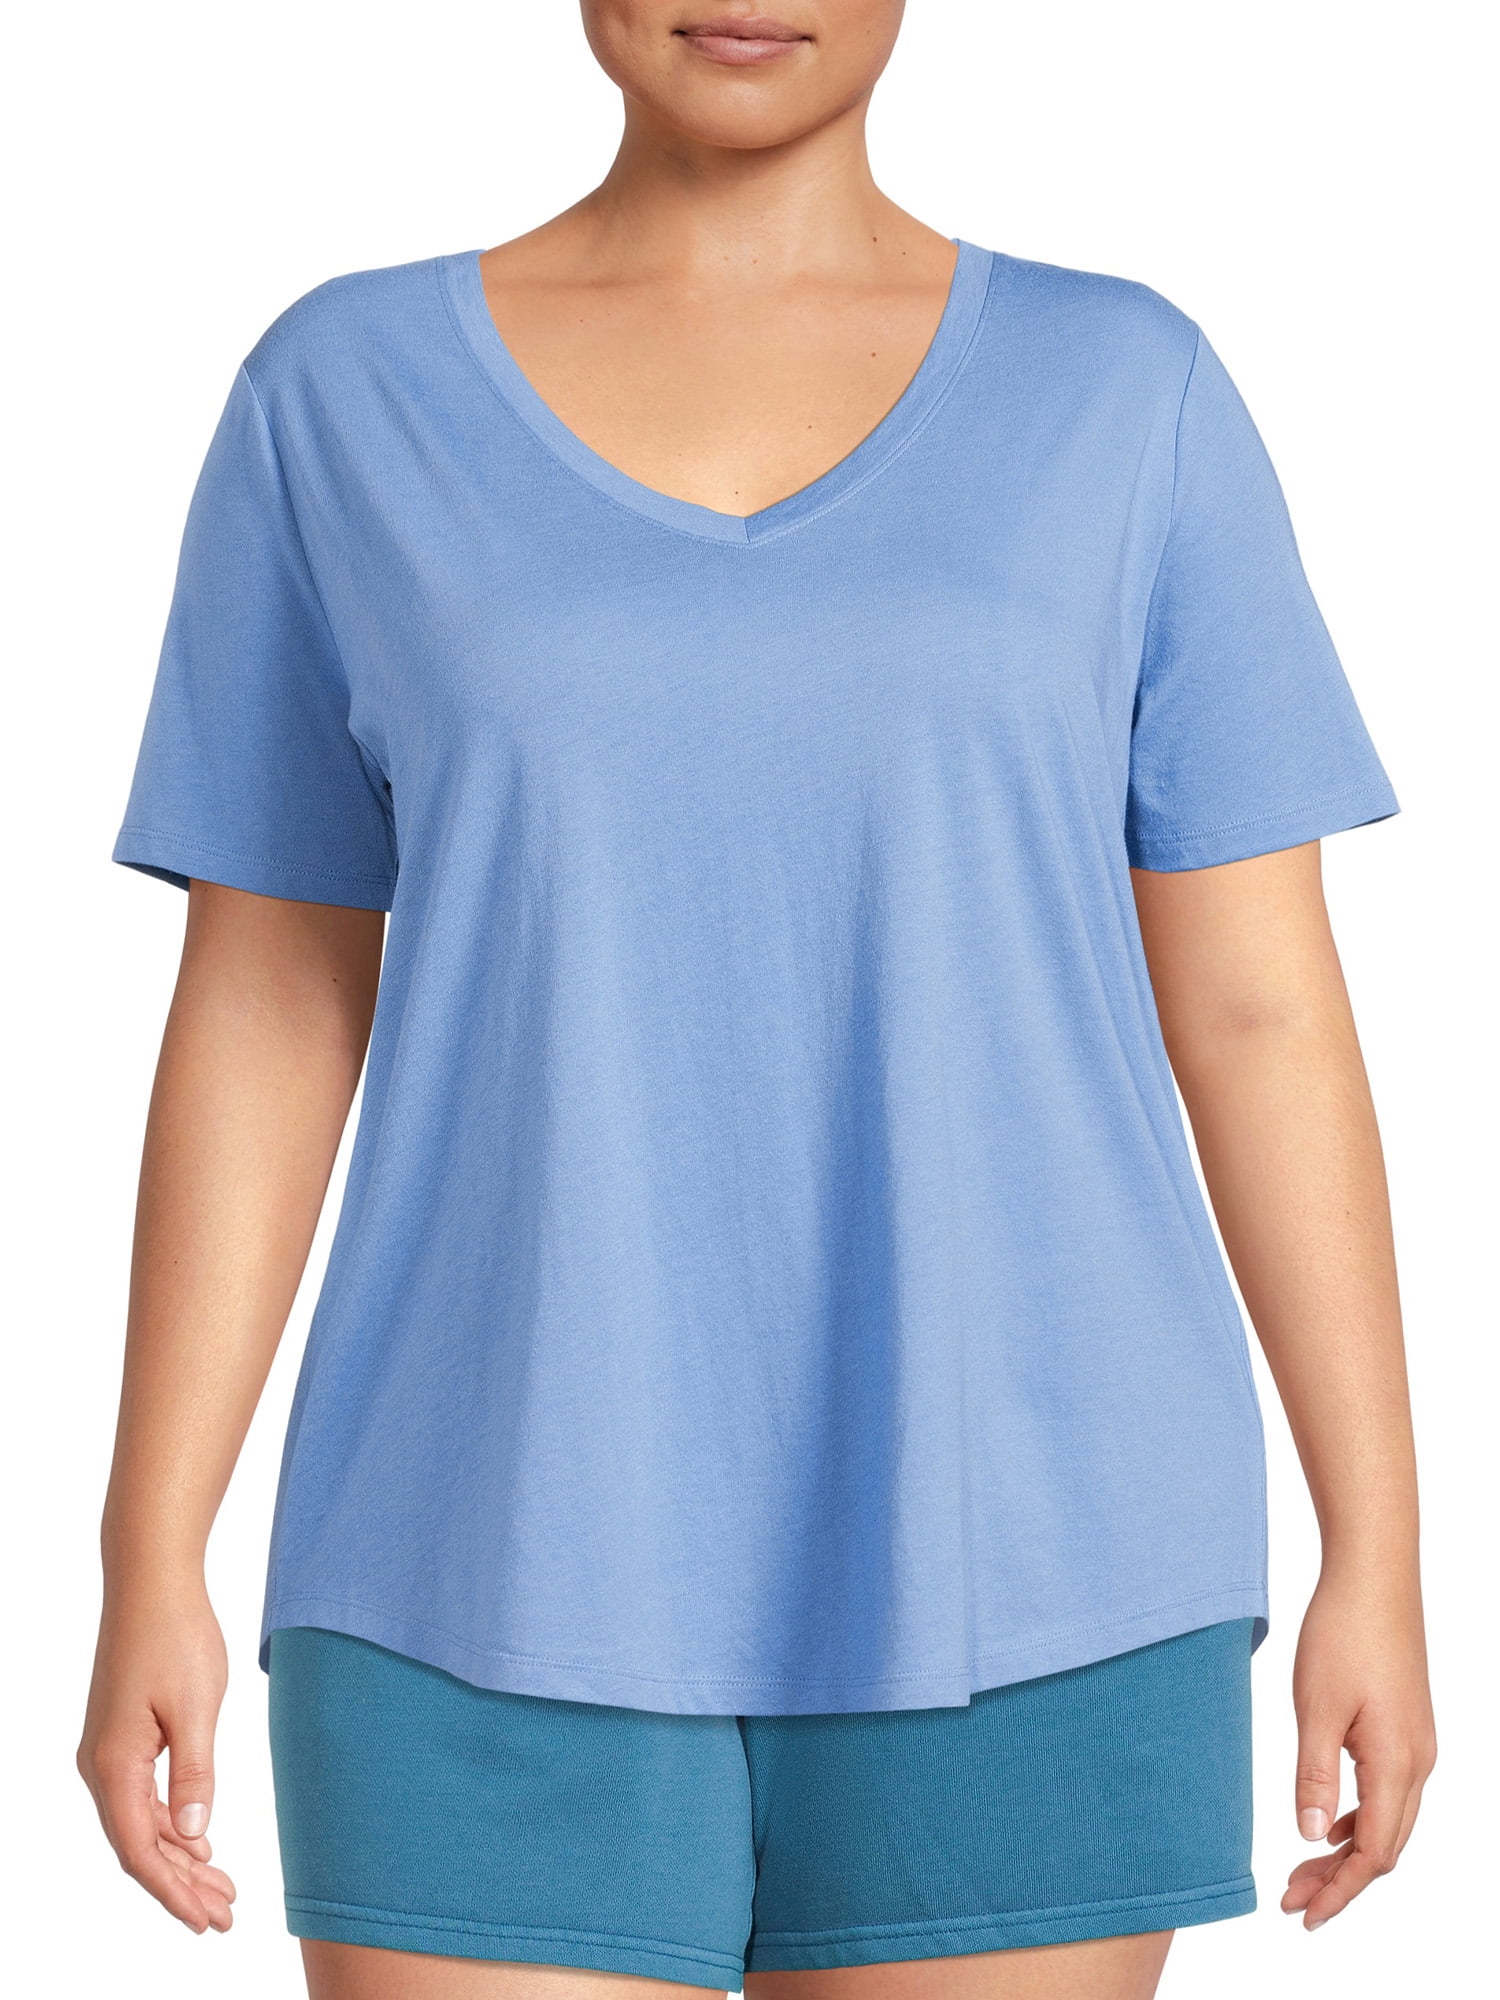 Terra & Sky Women's Plus Size V-Neck Tee with Short Sleeves